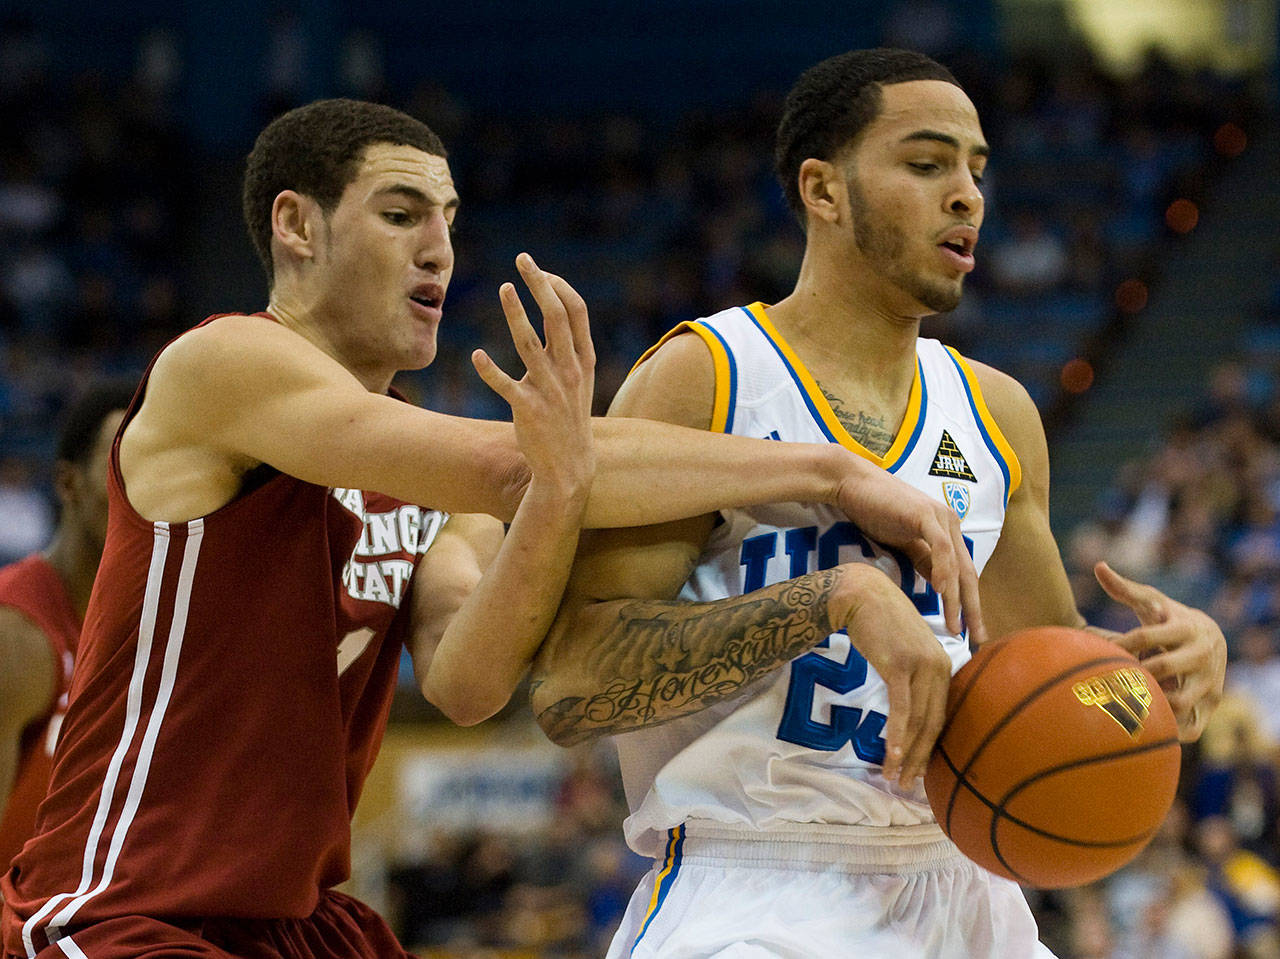 UCLA’s Tyler Honeycutt battles for a loose ball with Washington State’s Klay Thompson, left, during the first half at Pauley Pavilion in Los Angeles, California, on Wednesday, December 29, 2010. (Kevin Sullivan/Orange County Register/MCT)